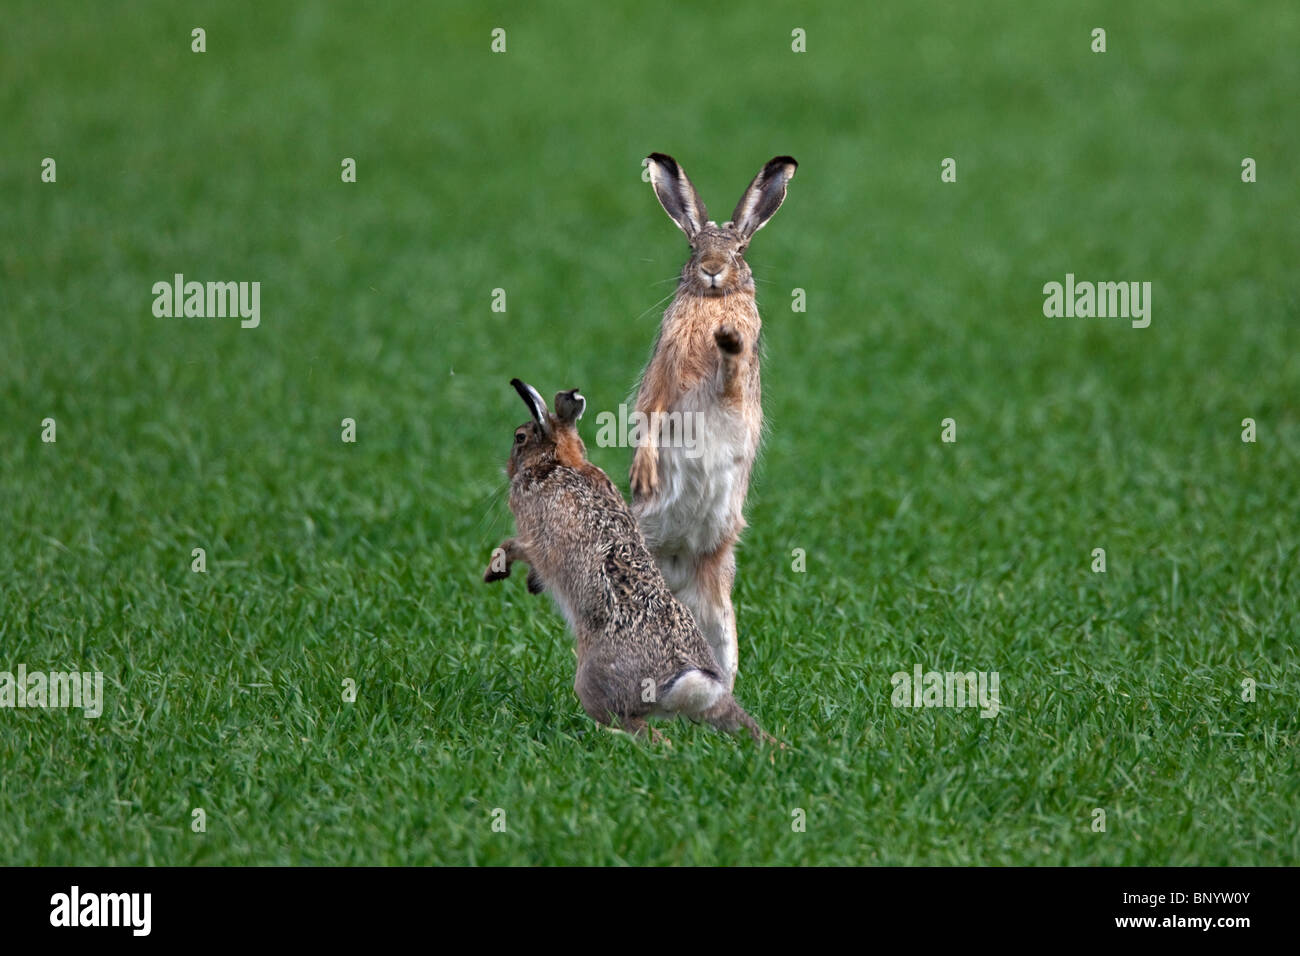 European Brown Hares (Lepus europaeus) boxing / fighting in field during the breeding season, Germany Stock Photo